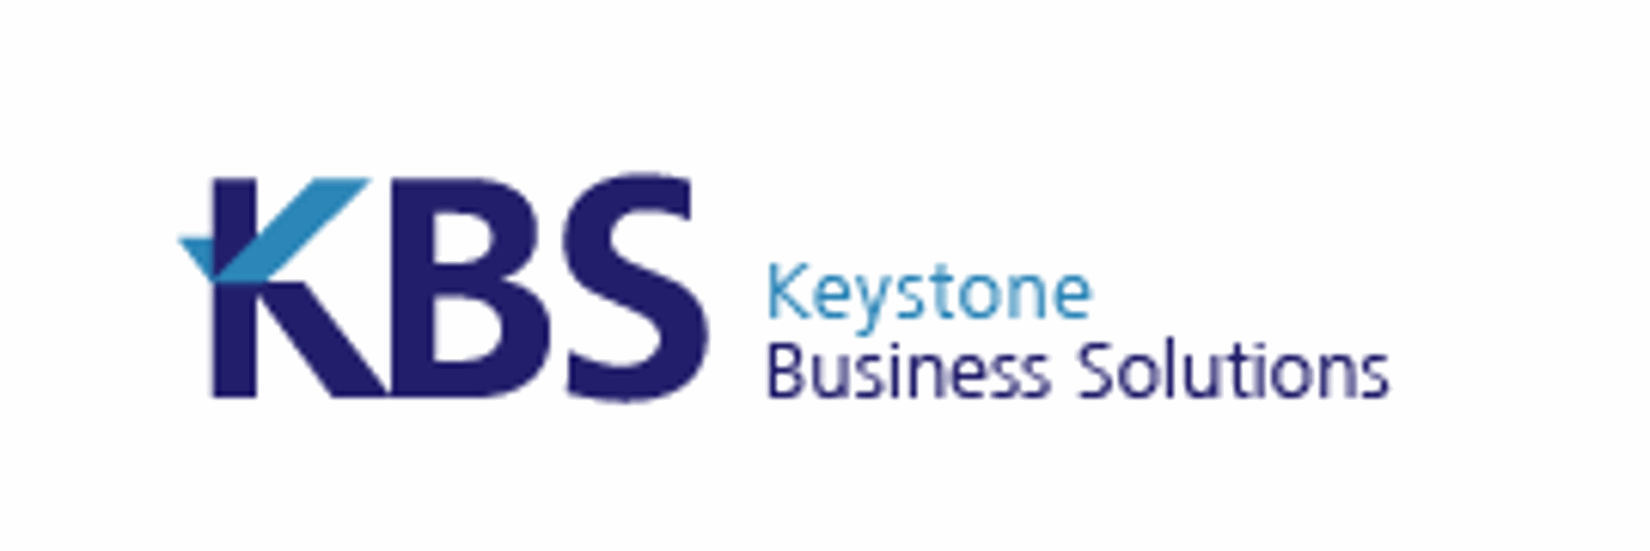 Keystone Business Solutions Budapest: Innovative & Cost Effective IT Services